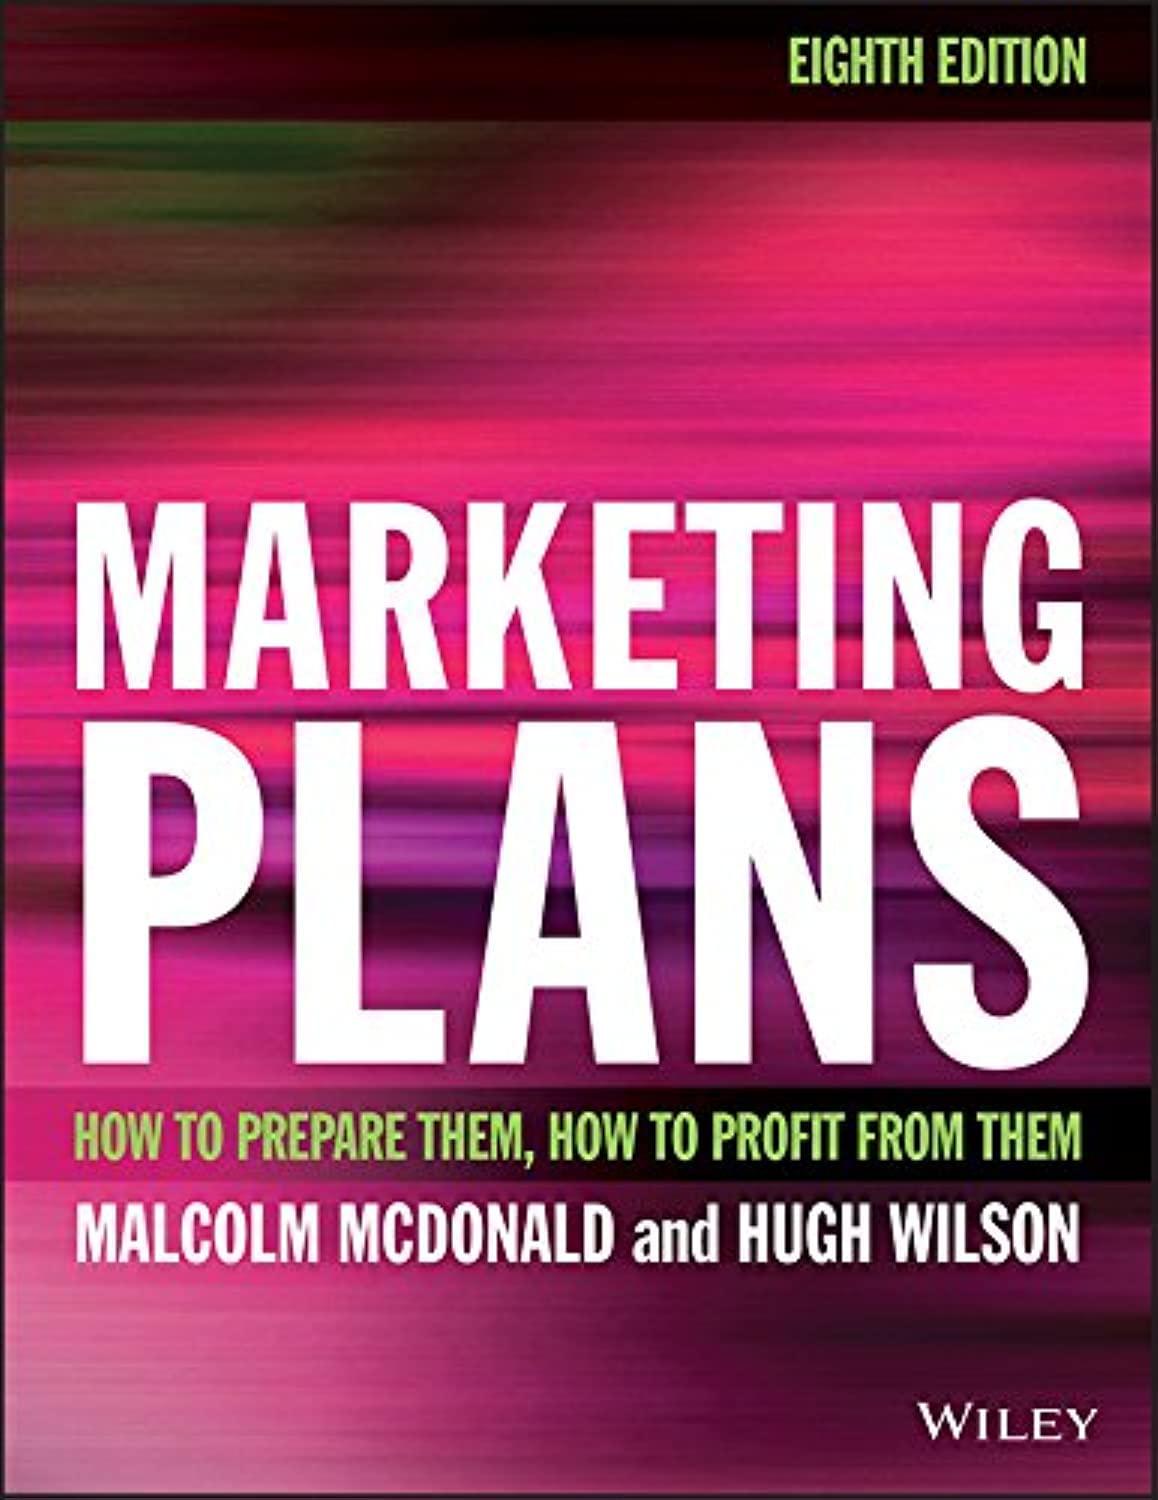 marketing plans how to prepare them, how to profit from them 8th edition malcolm mcdonald , hugh wilson